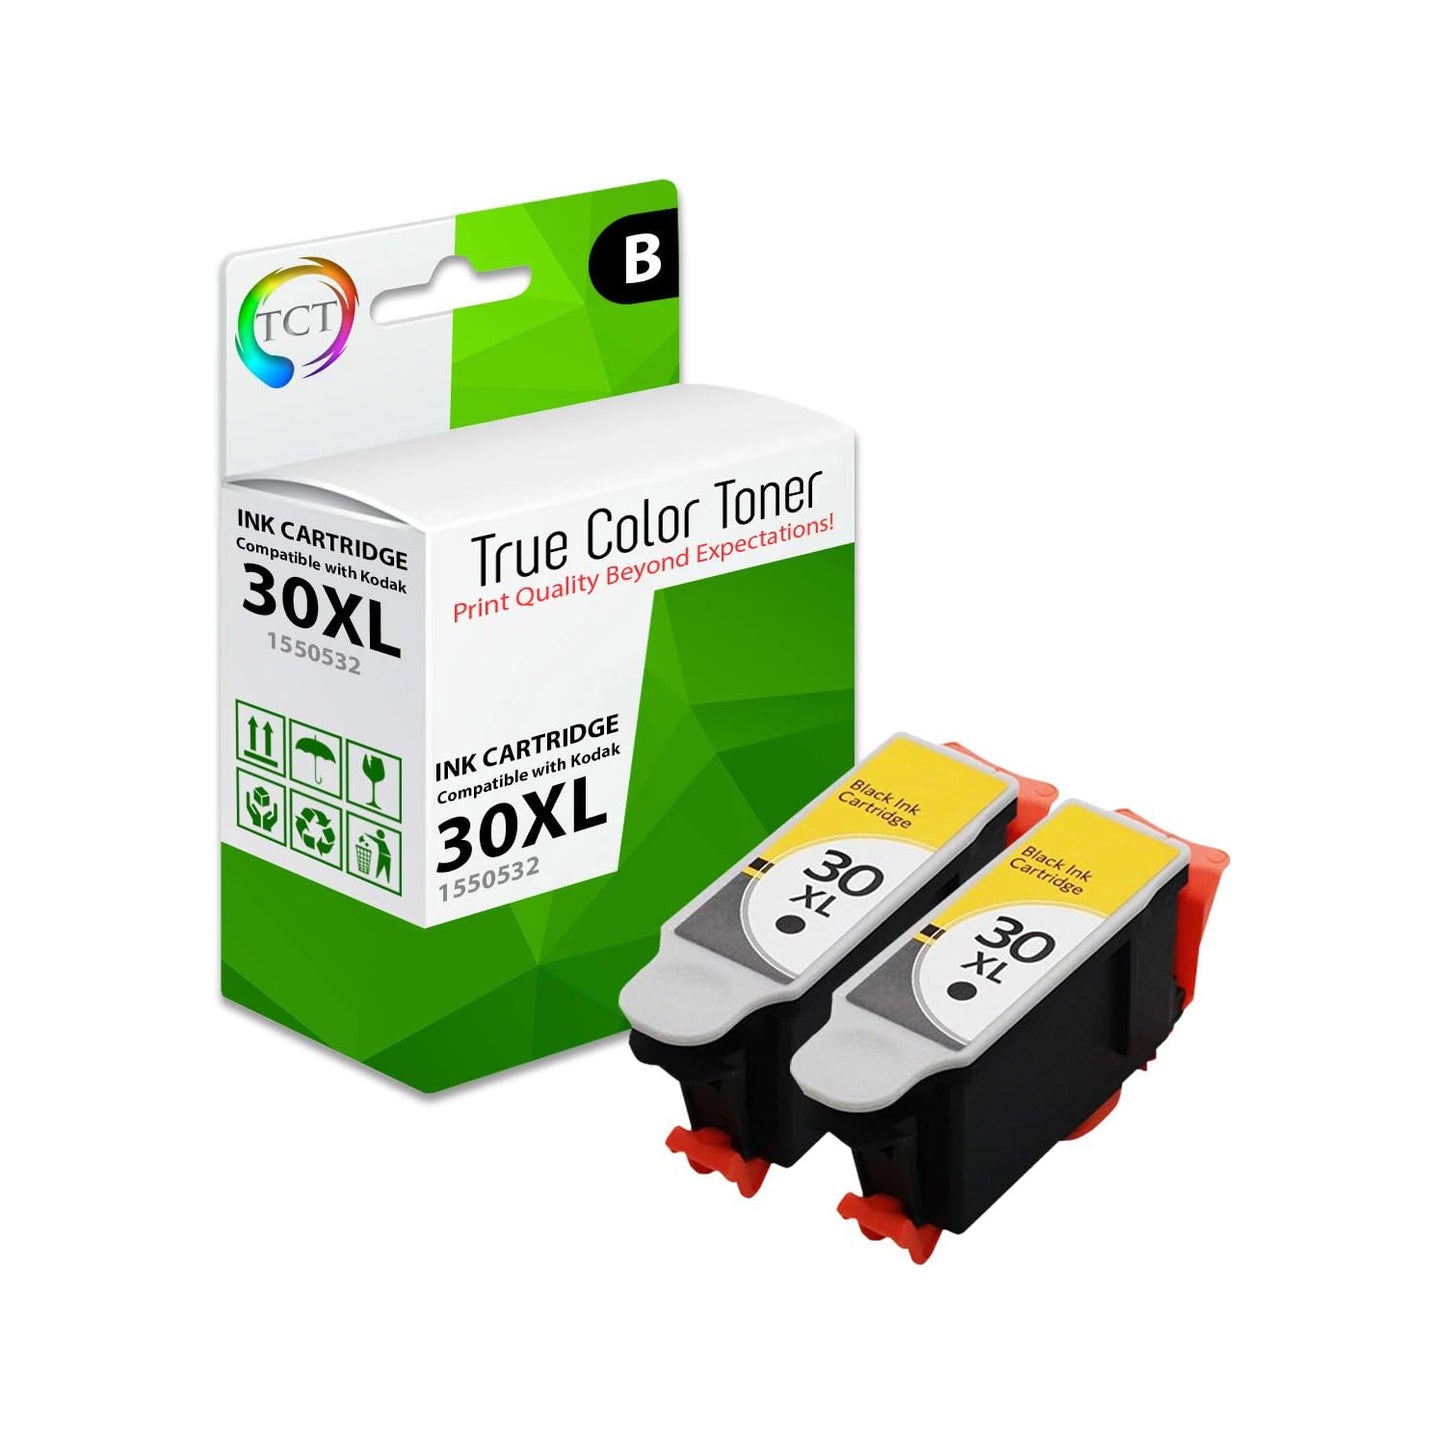 TCT Compatible High Yield Ink Cartridge Replacement for the Kodak 30XL Series - 2 Pack Black